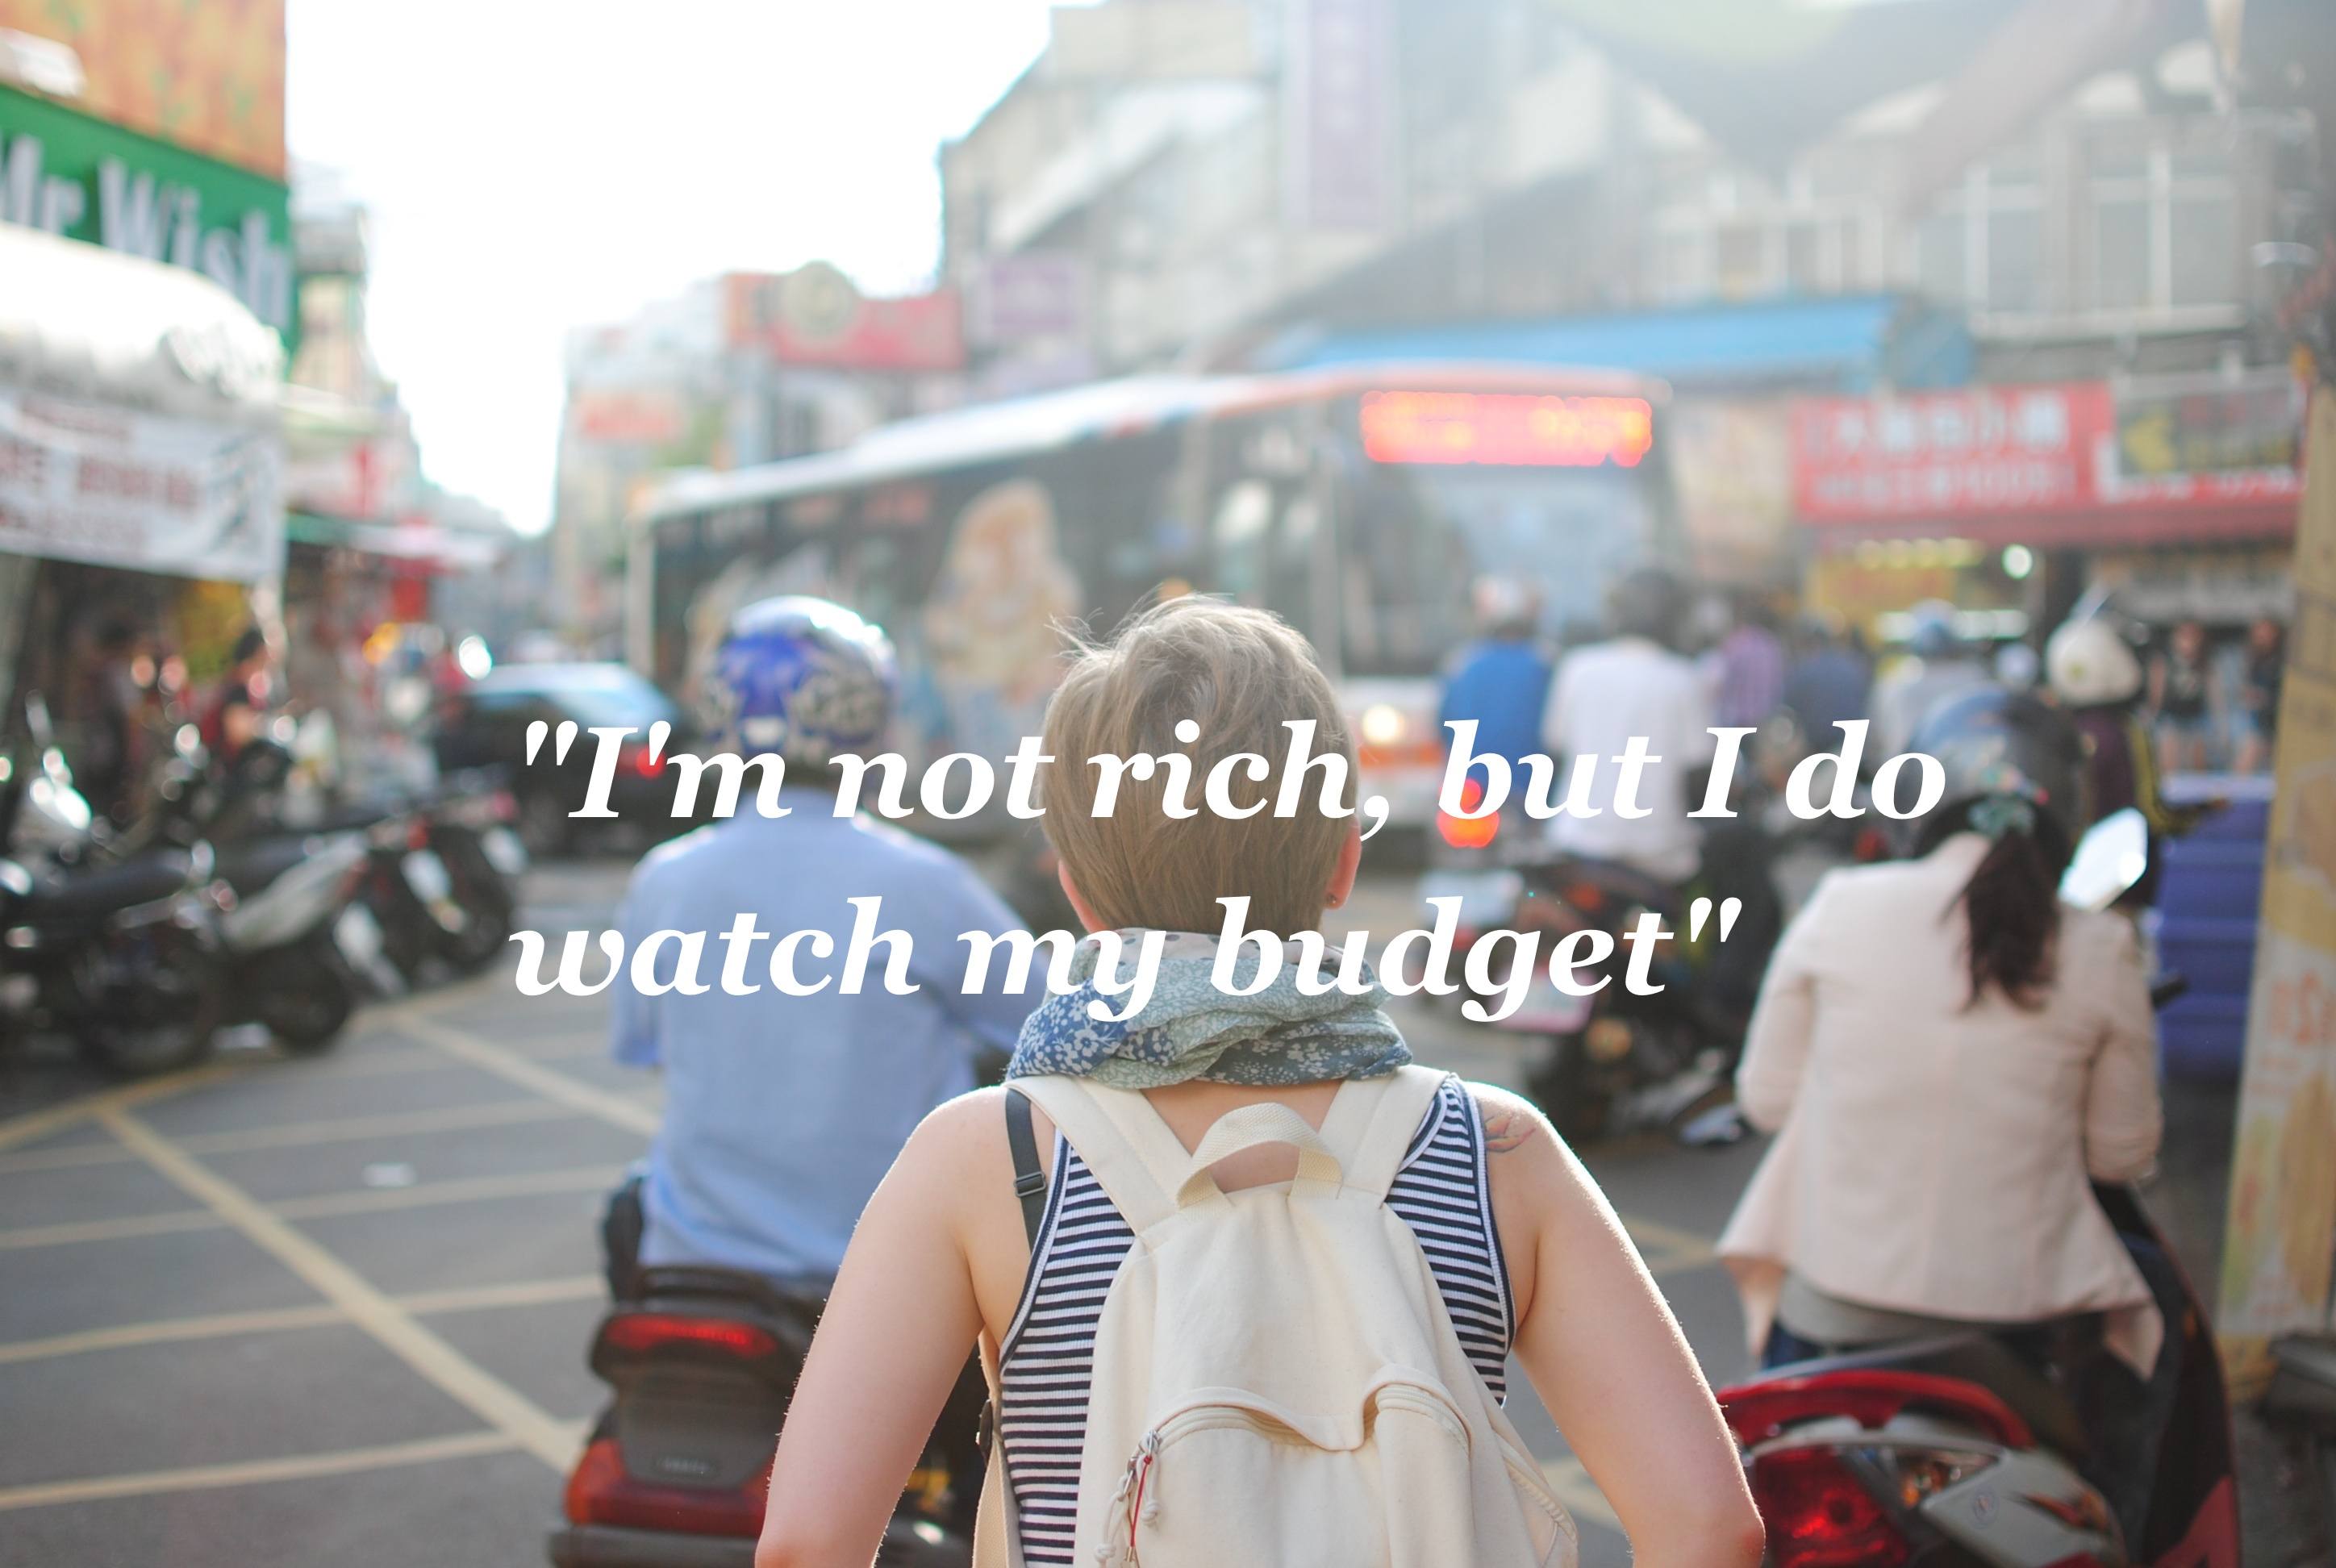 12 Confessions Of Travelers That They Want People To Know